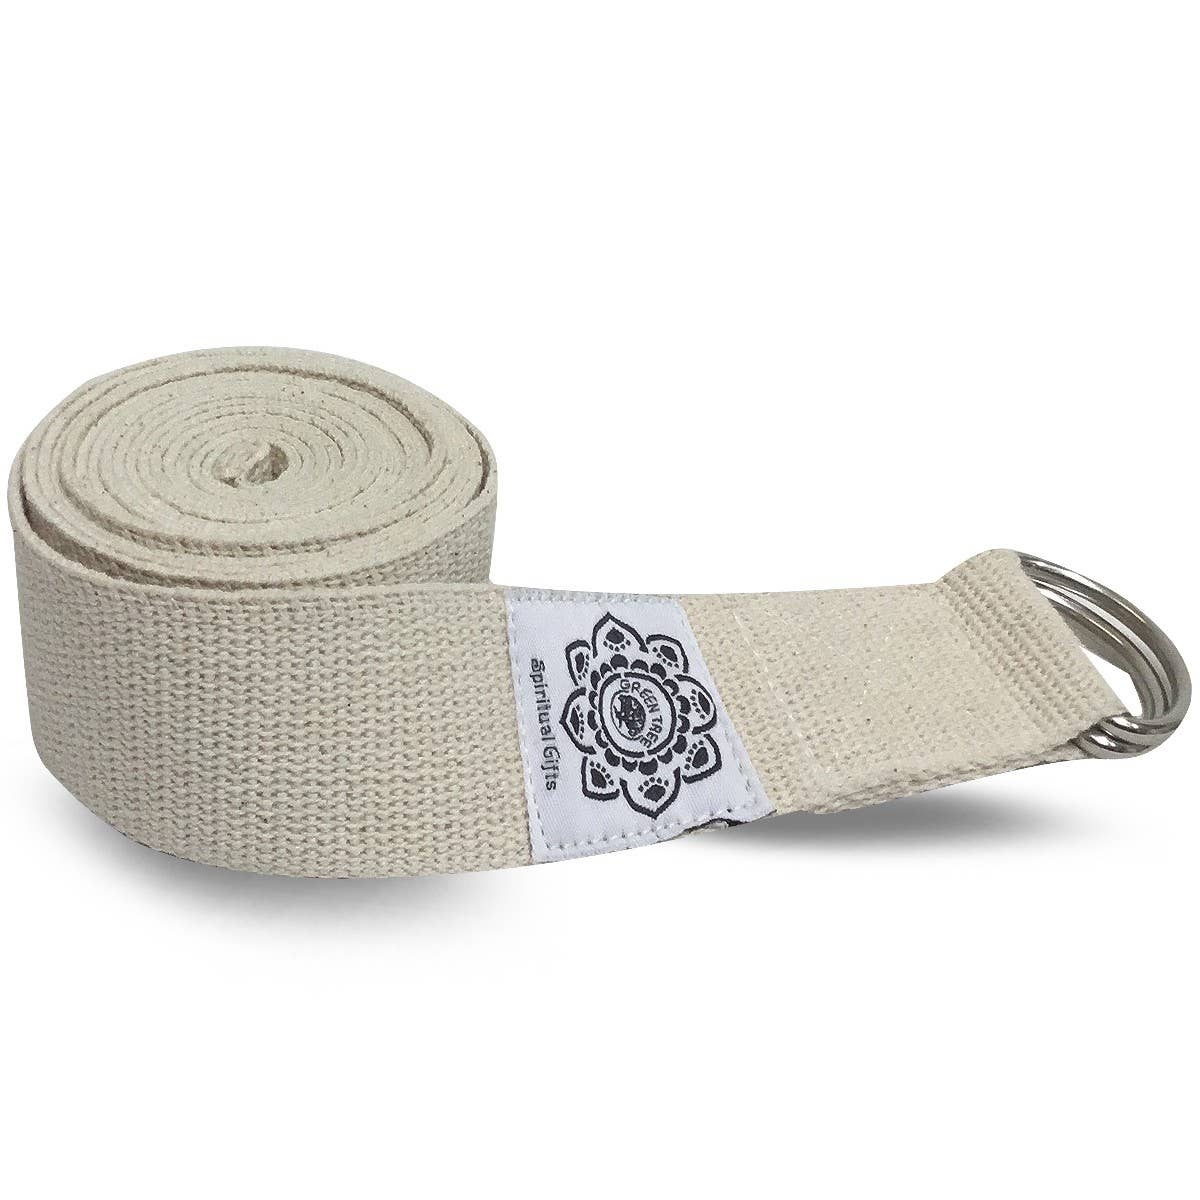 Gaiam Yoga Strap Premium Athletic Stretch Band with Adjustable Metal D-Ring  Buckle Loop | Exercise & Fitness Stretching for Yoga, Pilates, Physical